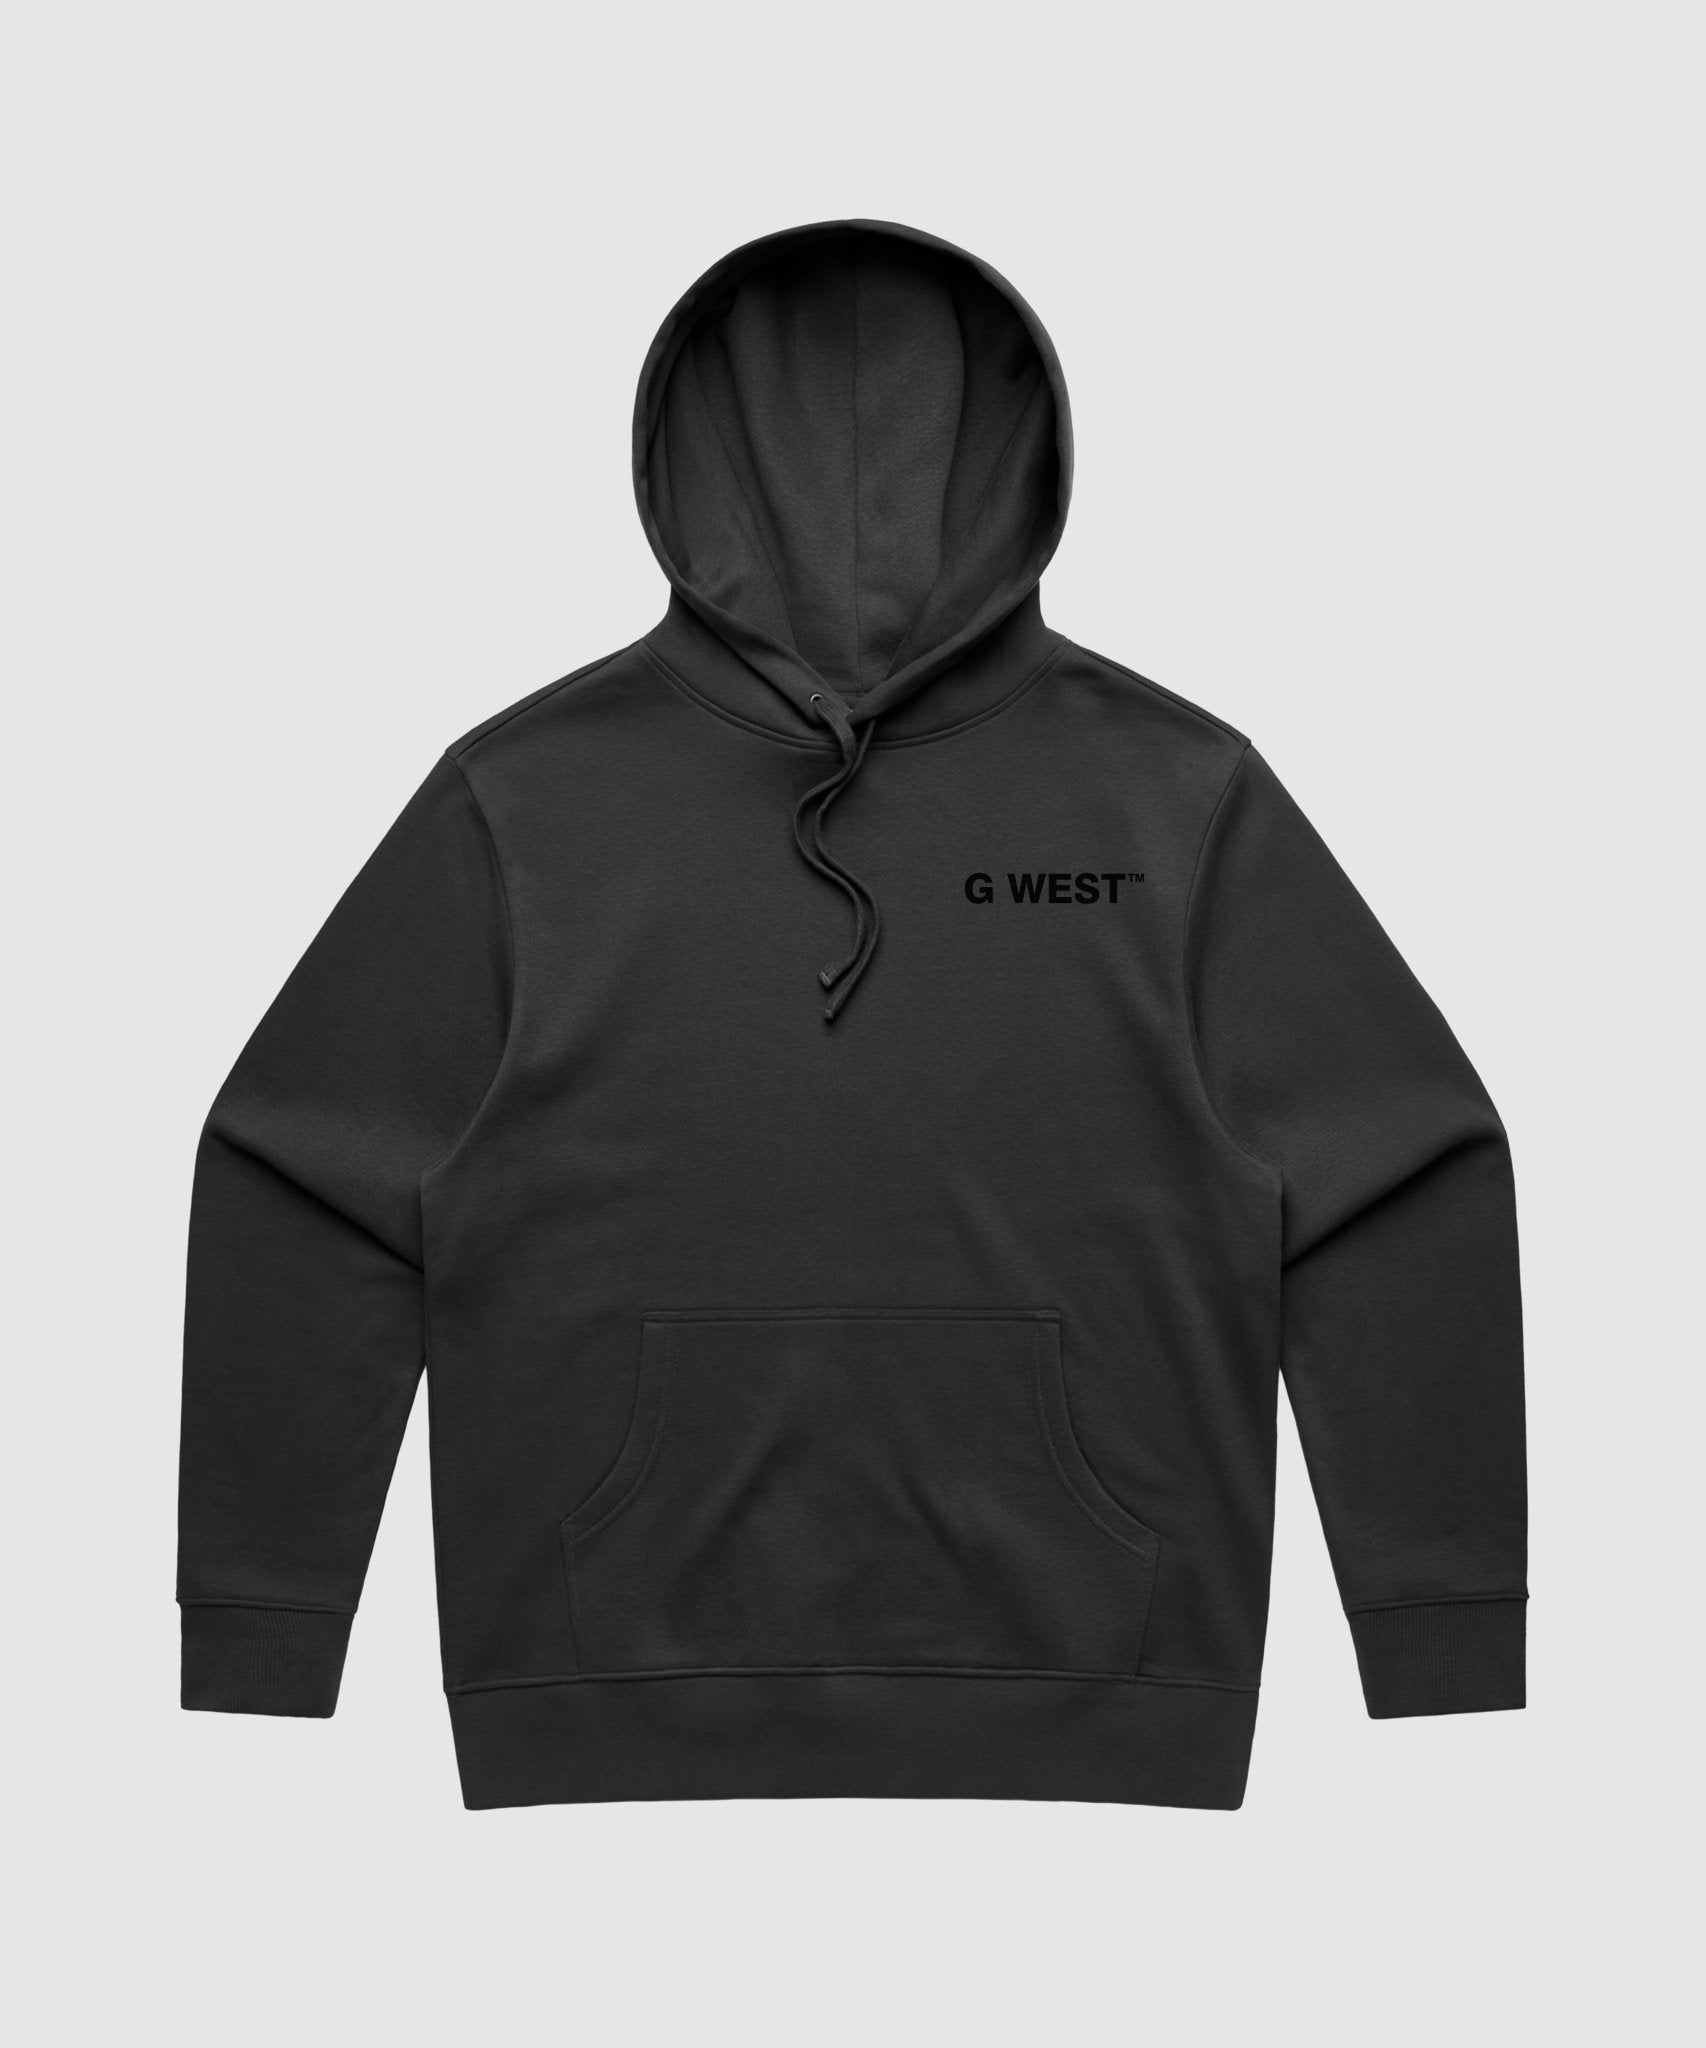 G WEST HOLOGRAPHIC CHAIN HEAVY PREMIUM HOODIE - 6 COLORS - G West